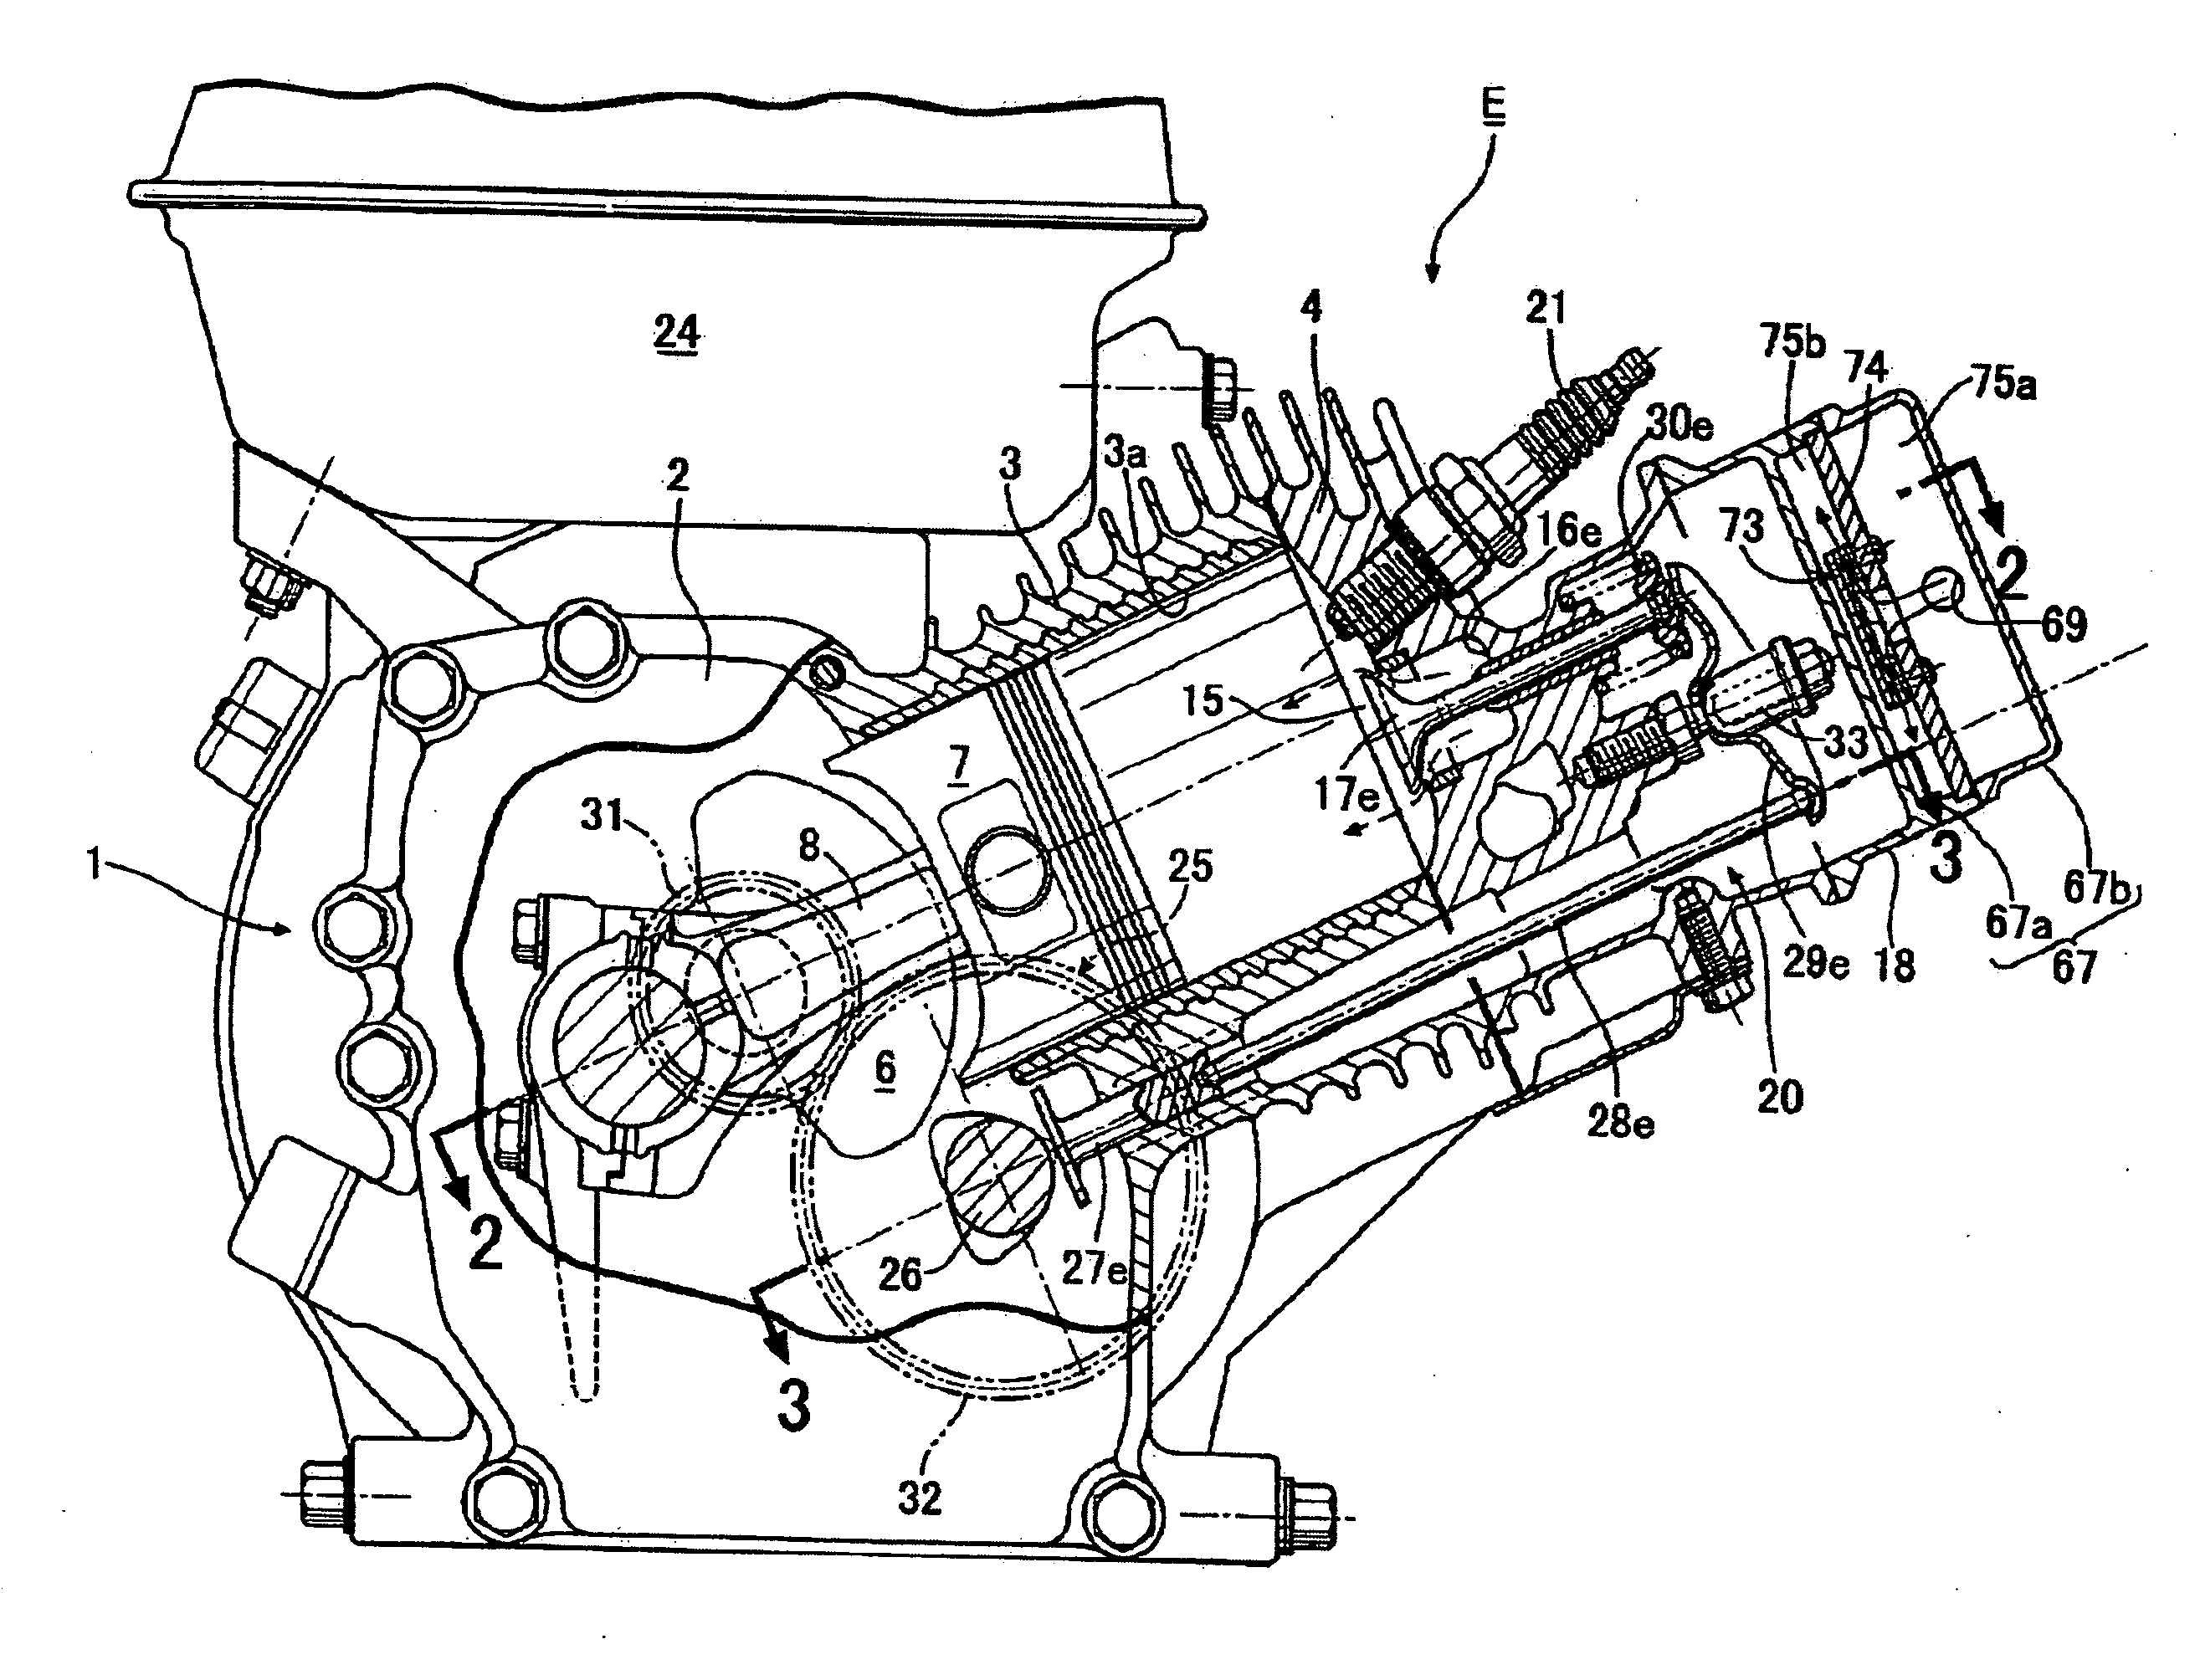 Exhaust emission control system for internal combustion engine